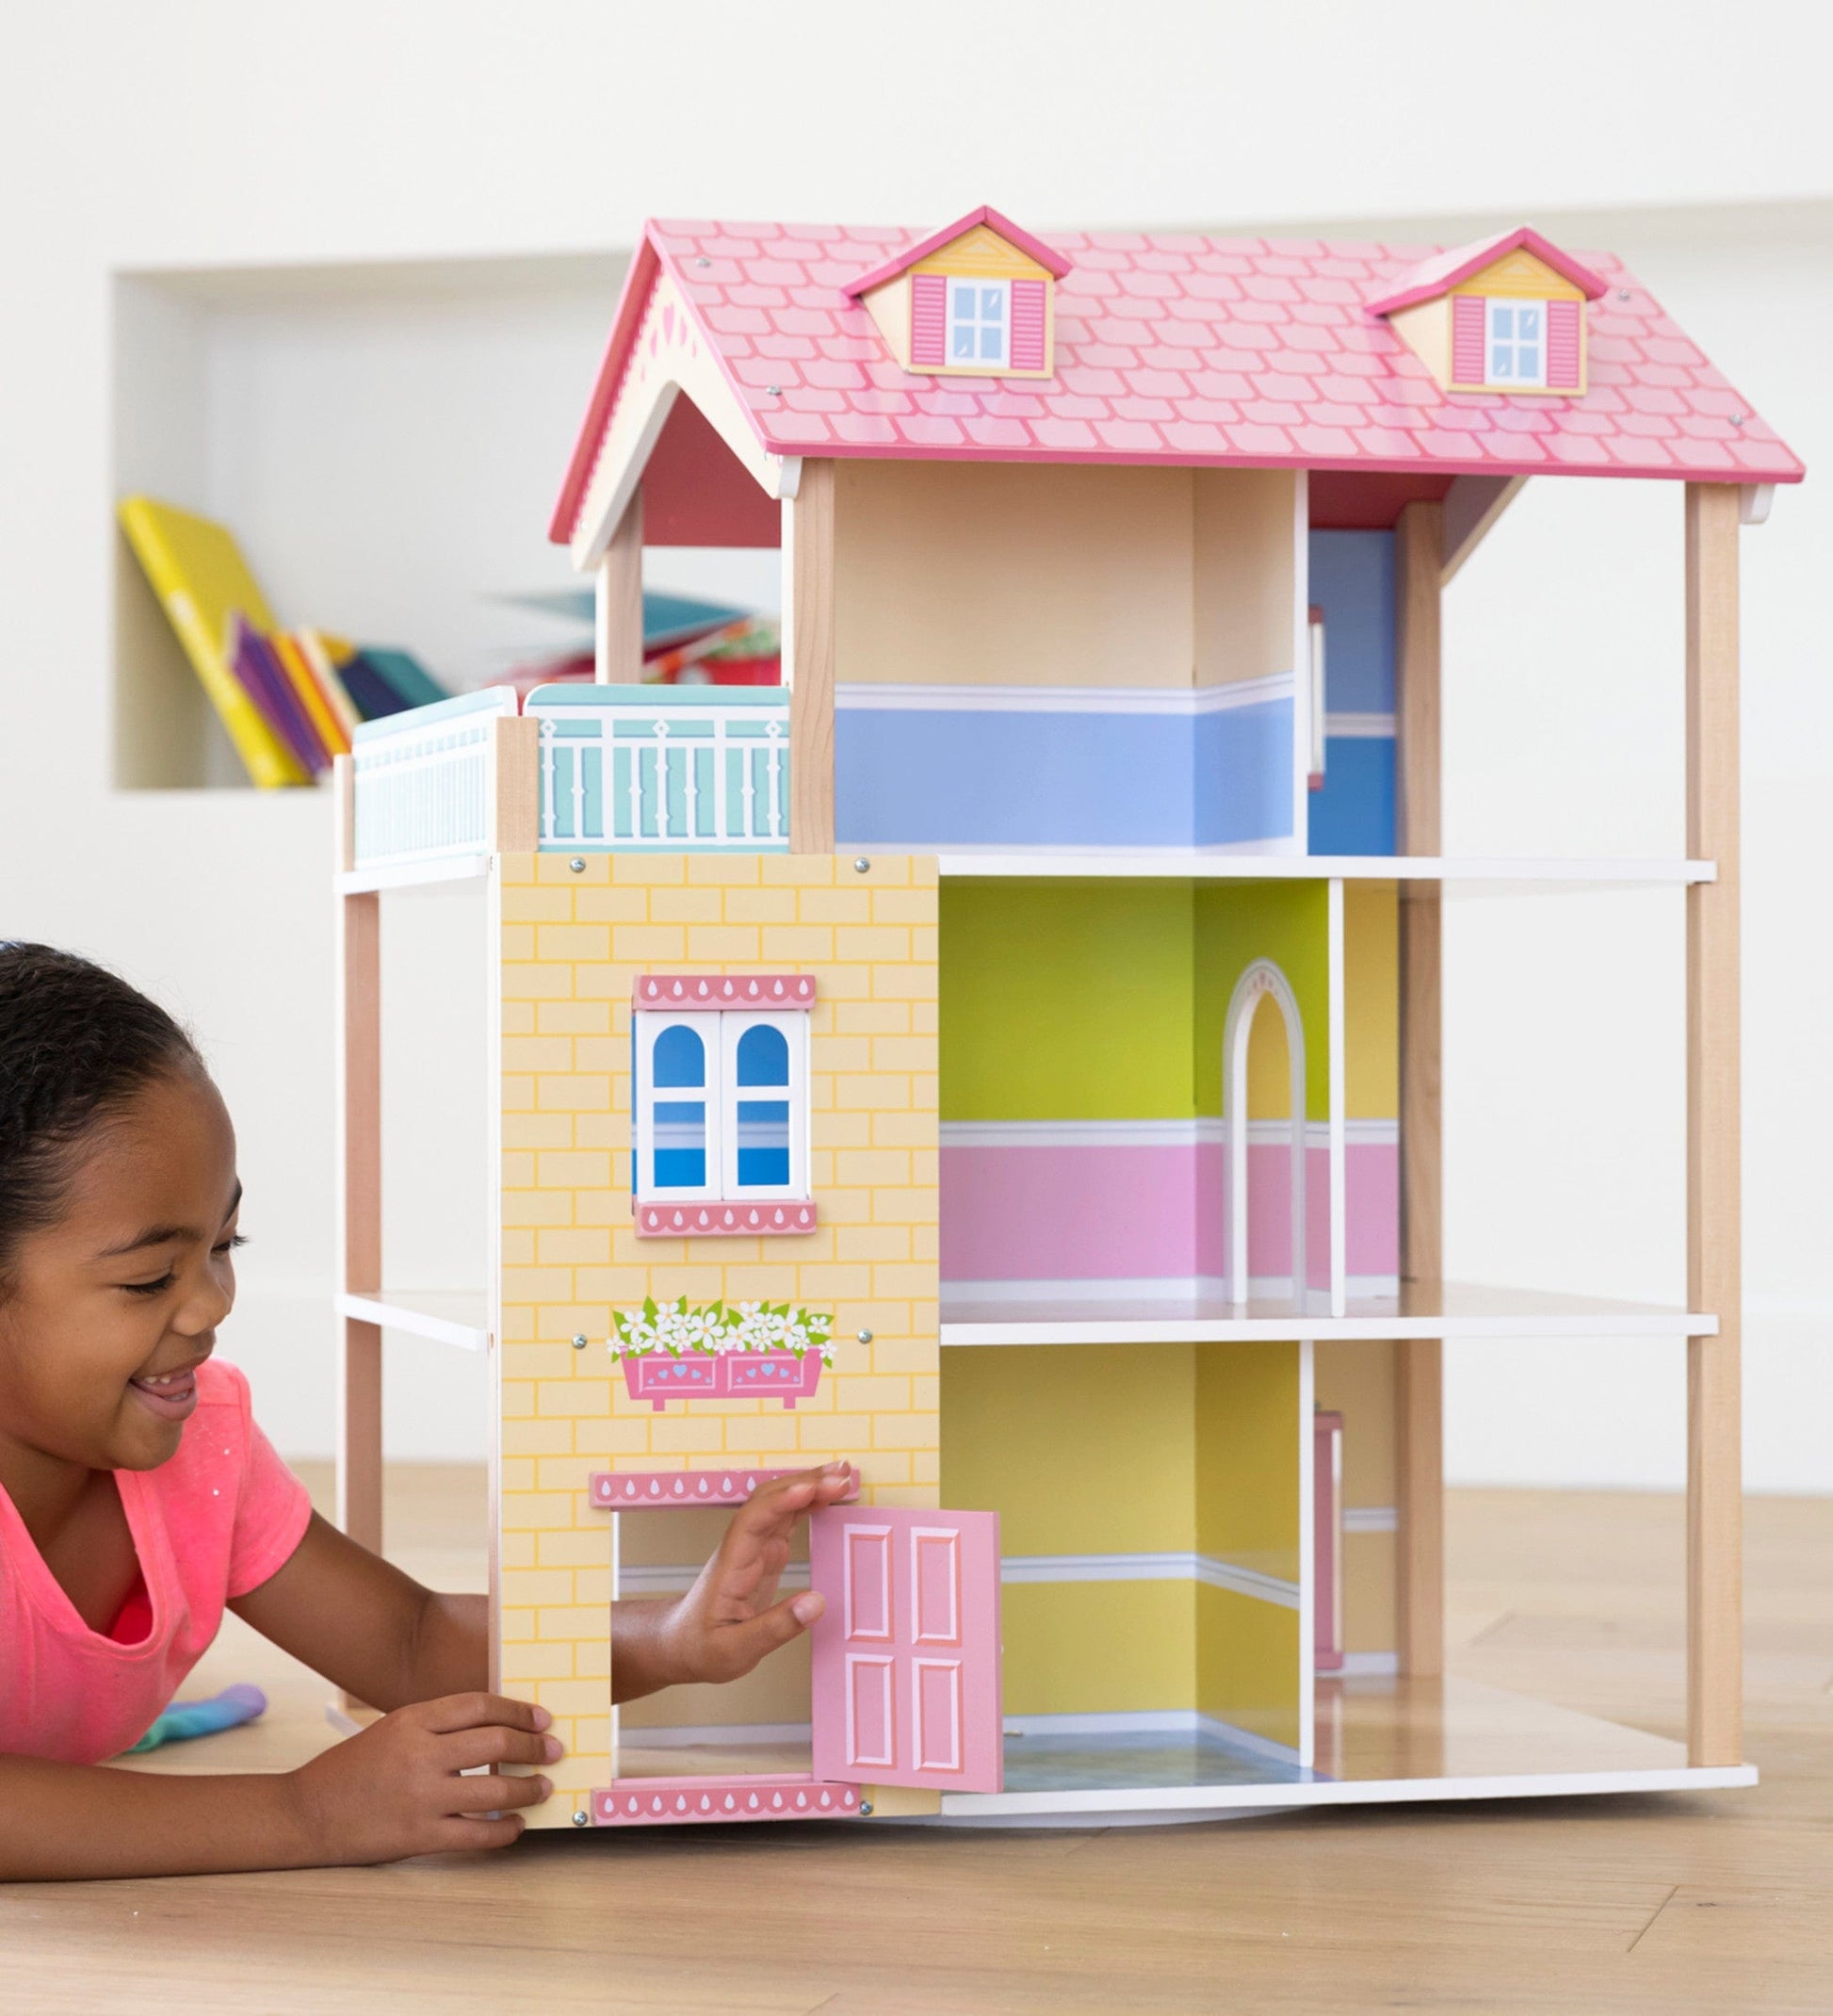  Dream Doll House Girls Toys- 4-Story 12 Rooms